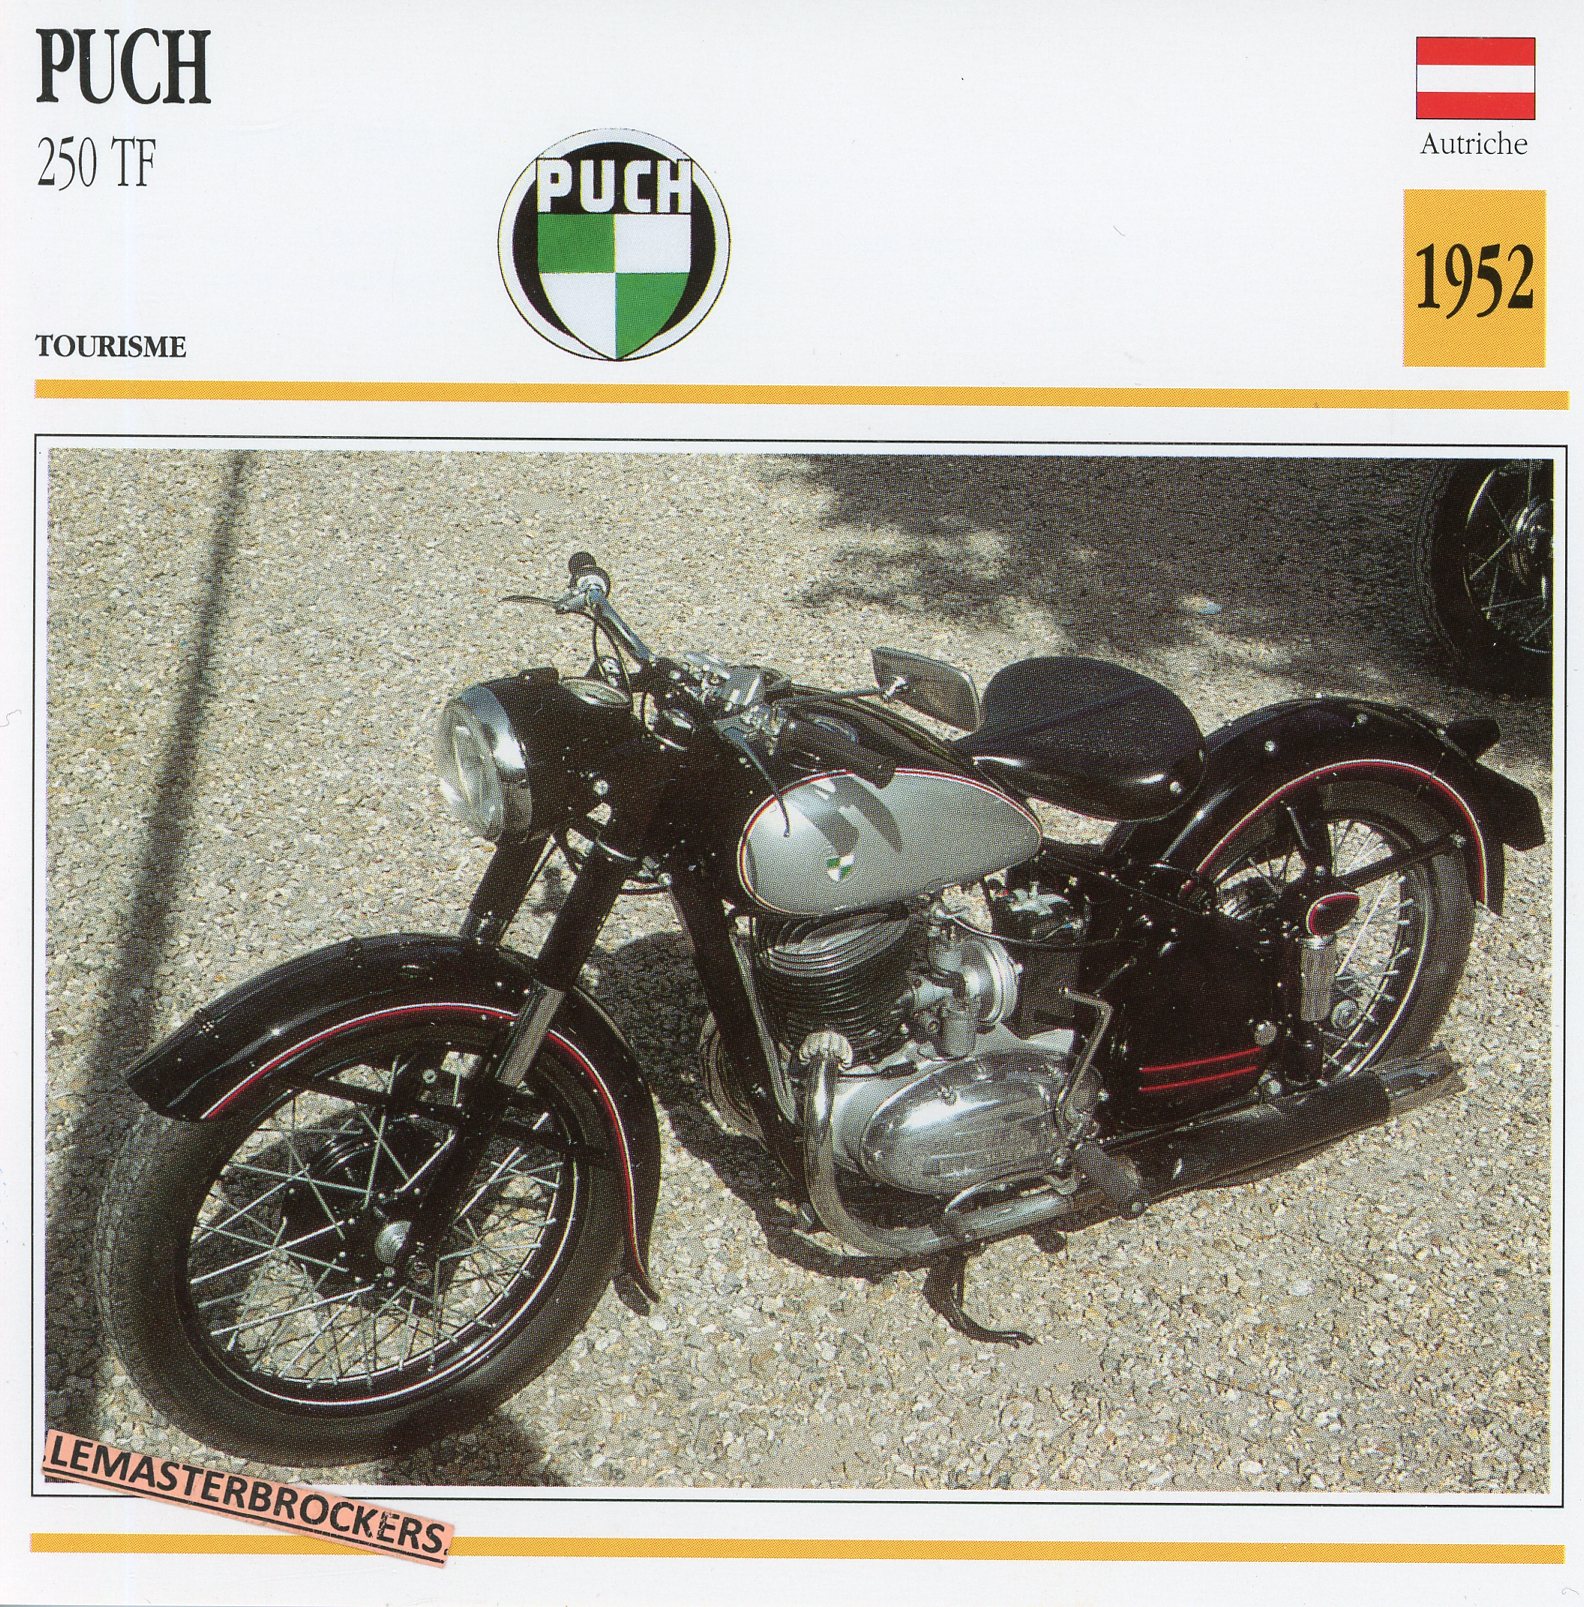 PUCH-250-TF-1952-FICHE-SCOOTER-MOTORCYCLE-CARDS-ATLAS-LEMASTERBROCKERS